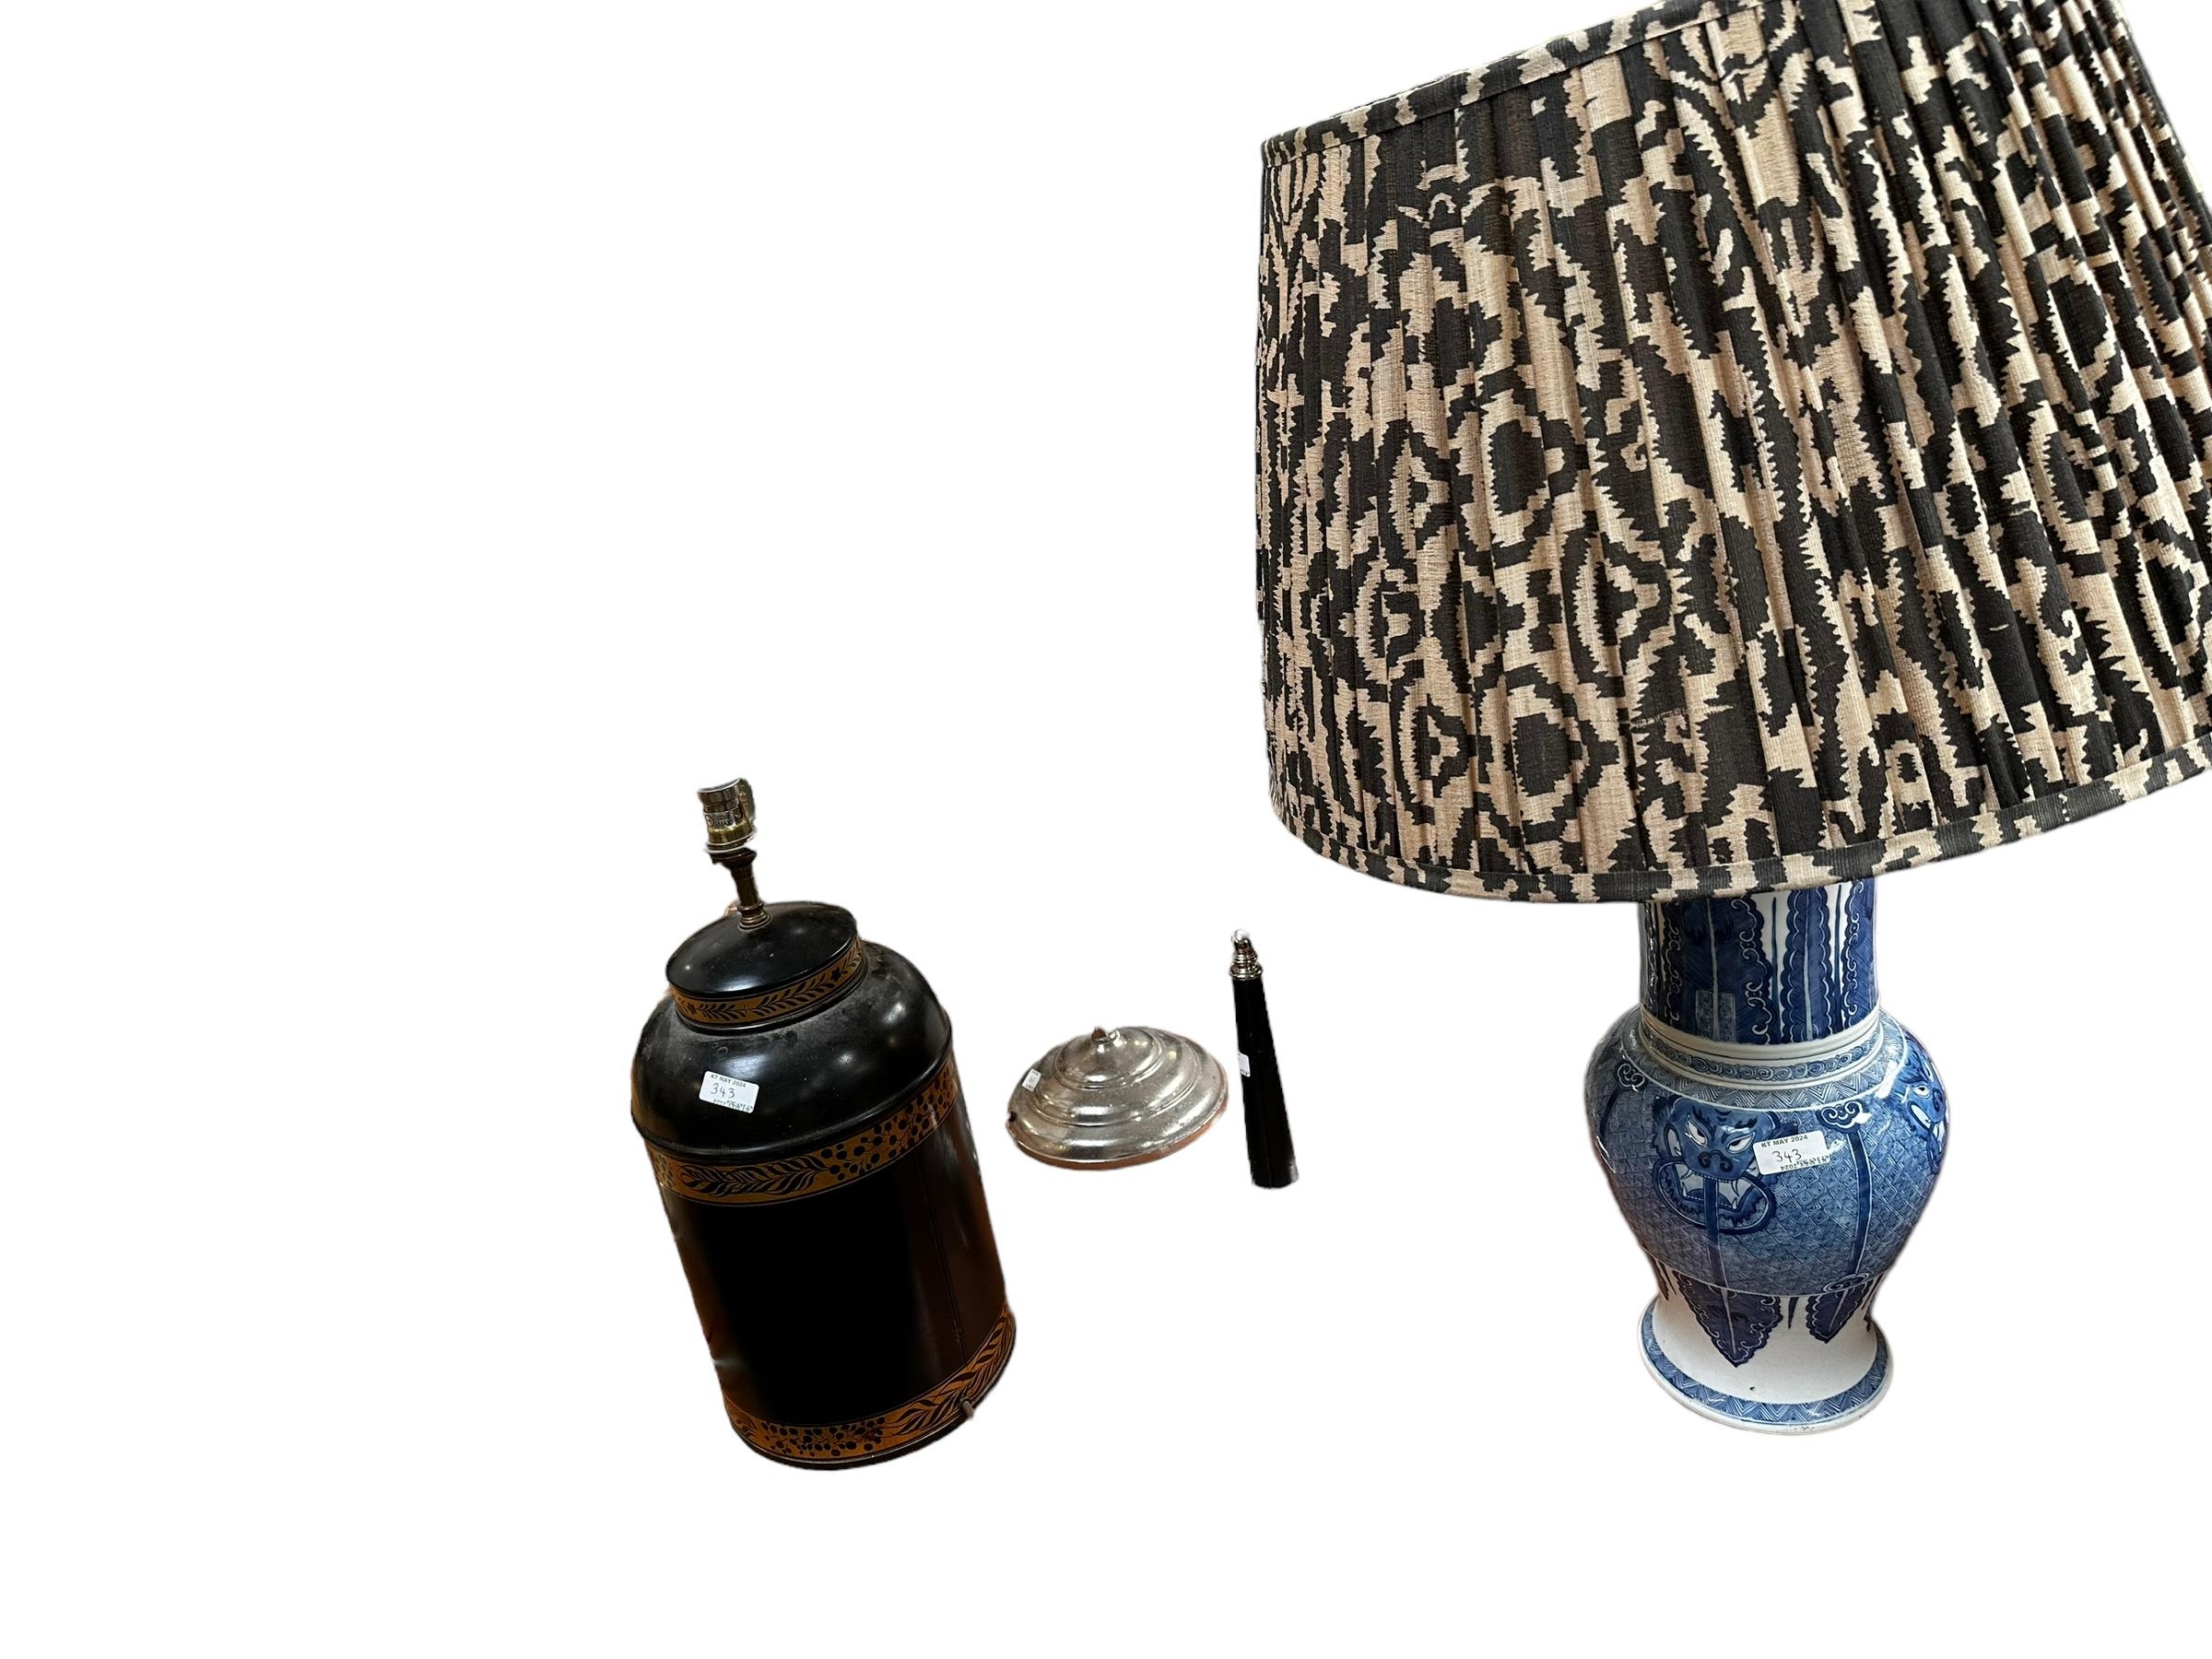 A large quantity of table lamps, lamp shades, desk lamp etc, some wear etc, house clearance sold - Image 5 of 7